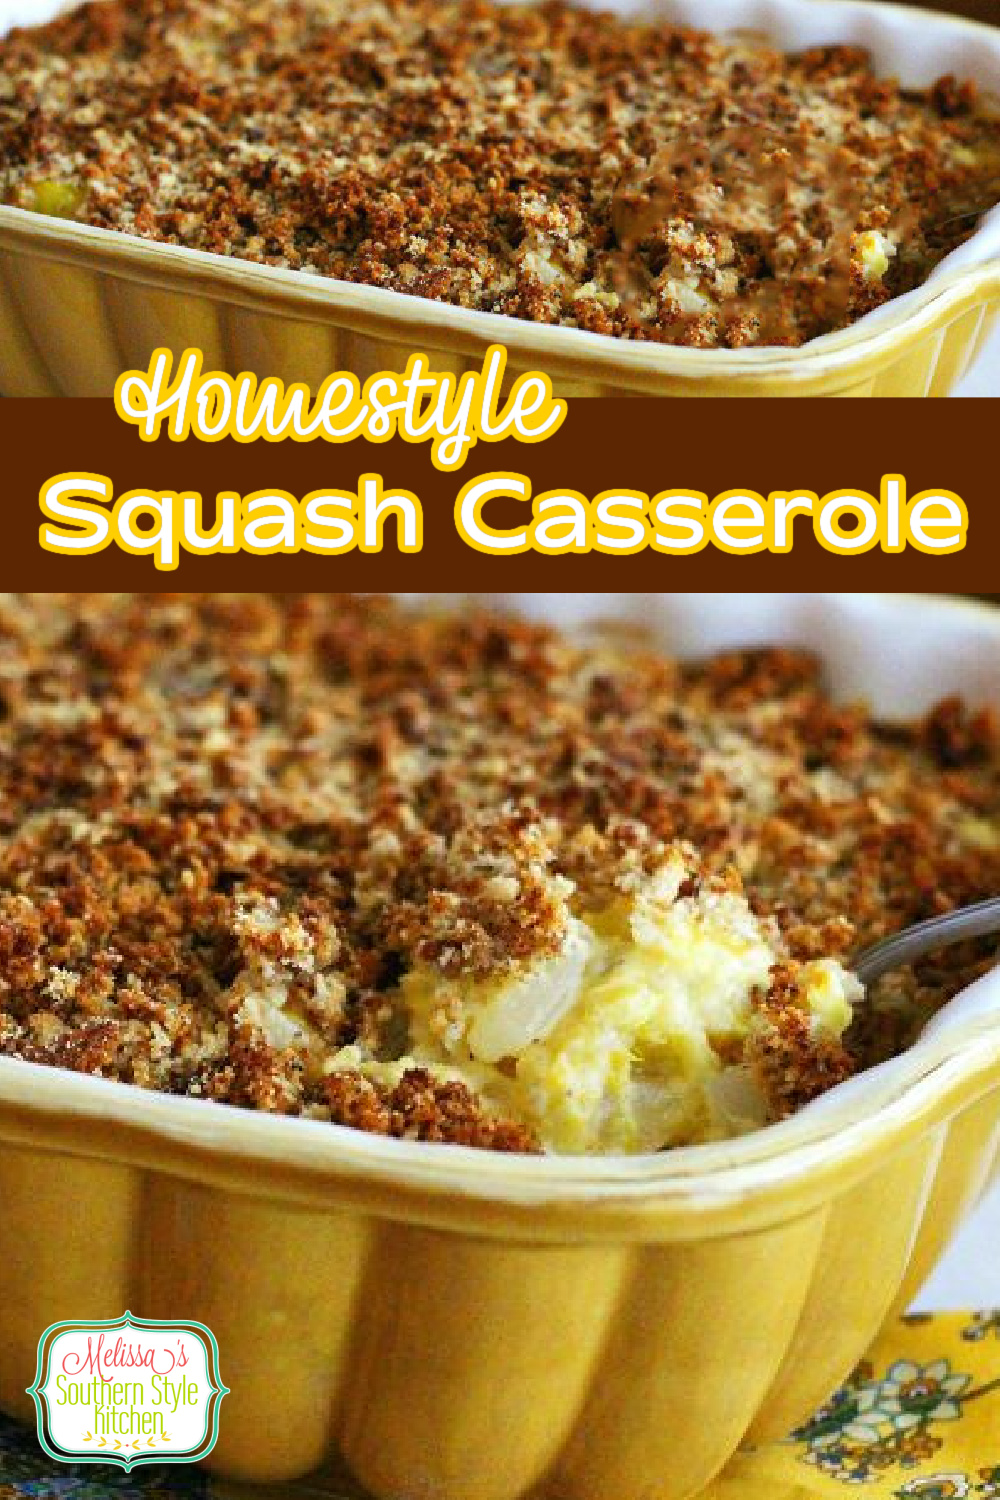 This Homestyle Squash Casserole is the ideal side for any occasion #squash #squashcasserole #summersquash #yellowsquash #casseroles #vegetarian #sidedishrecipes #dinnerideas #dinner #southernfood #southernrecipes #thanksgivingrecipes #fallbaking